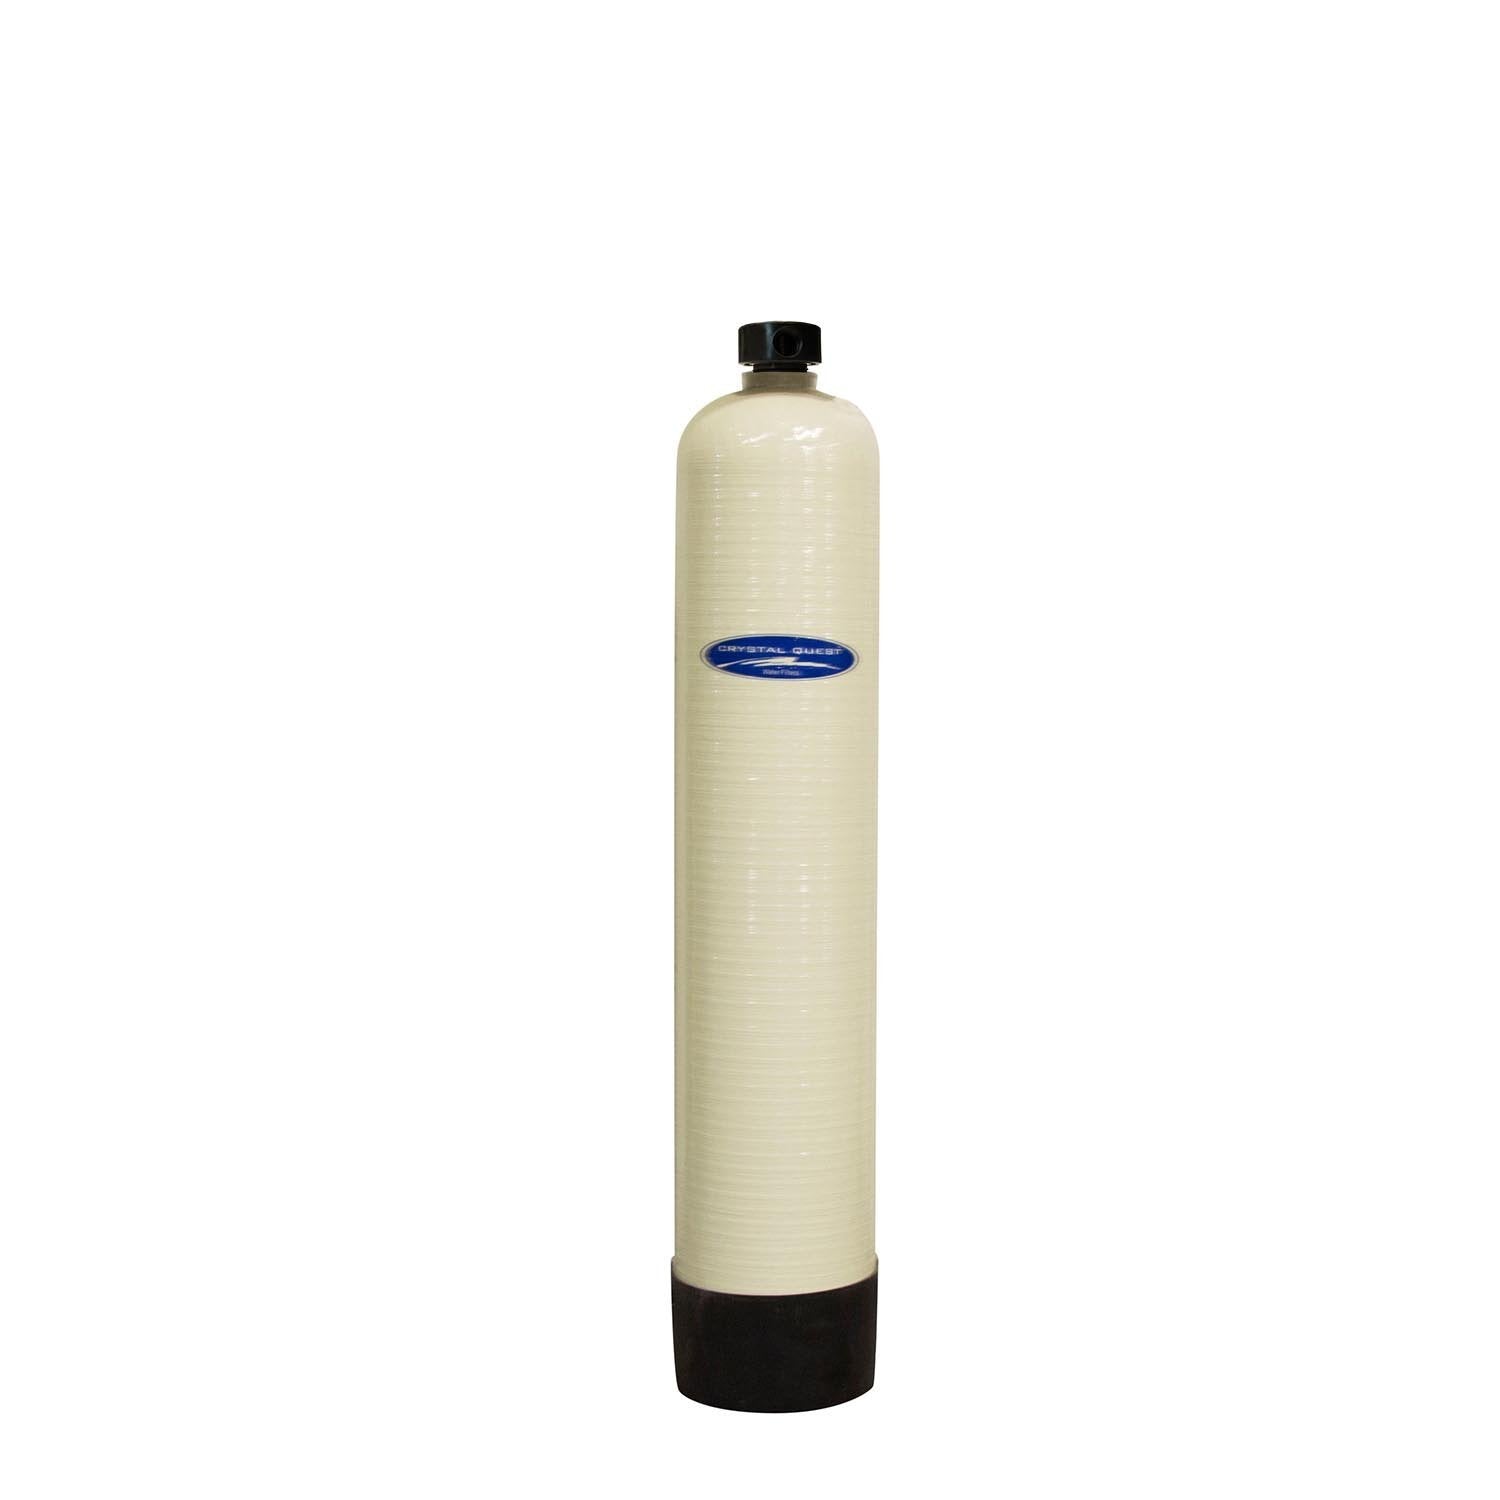 20 GPM Commercial Salt-Free Water Softener (Anti-Scale) System | 9.25 liters - Commercial - Crystal Quest Water Filters